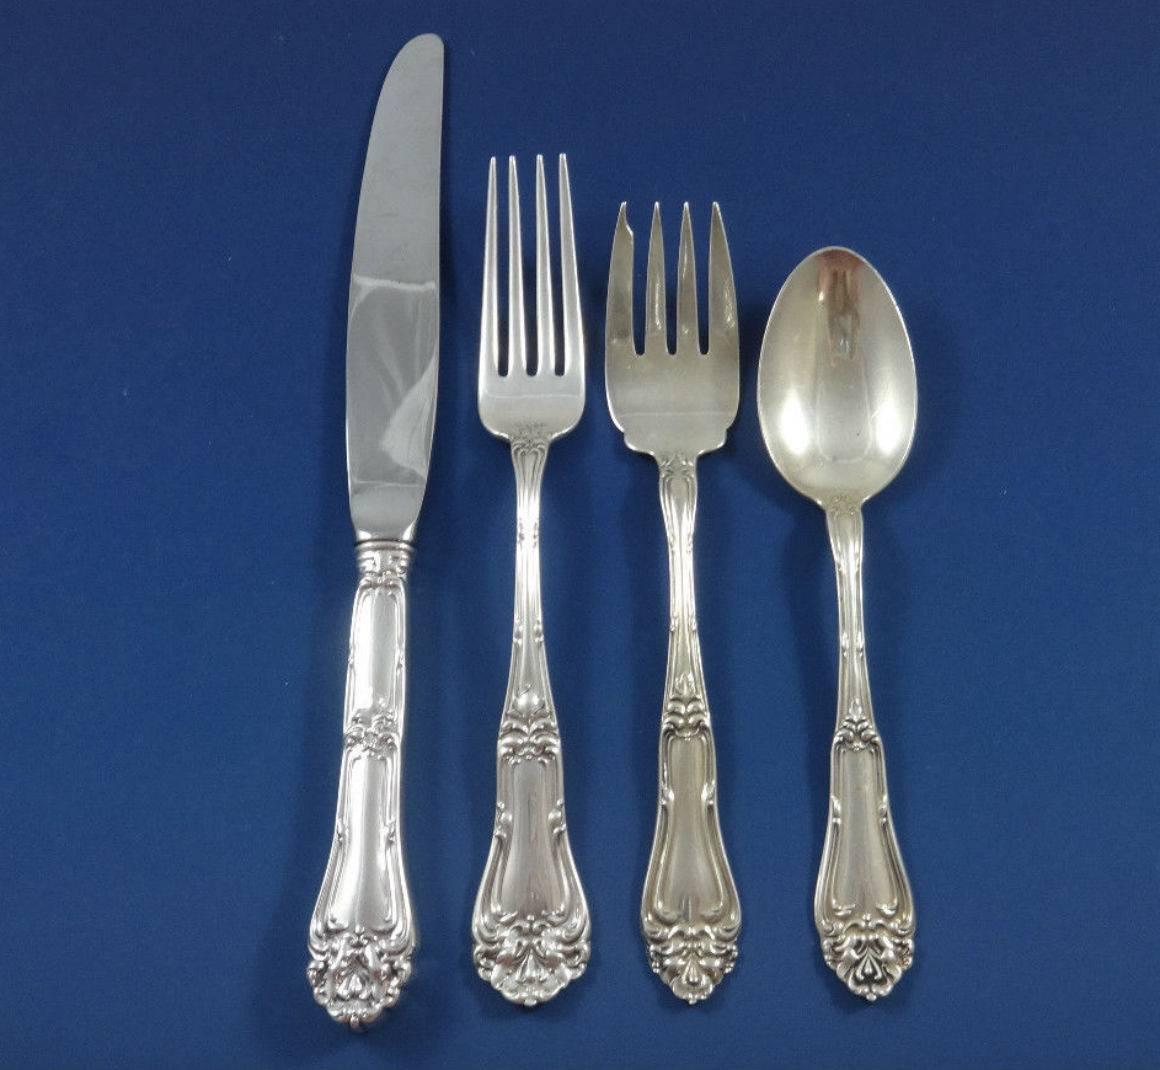 Rare Champlain by Amston sterling silver flatware set of 60 pieces. This pattern is very hard to find - We have not had a set come in in quite some time! This set includes: Eight knives, 9